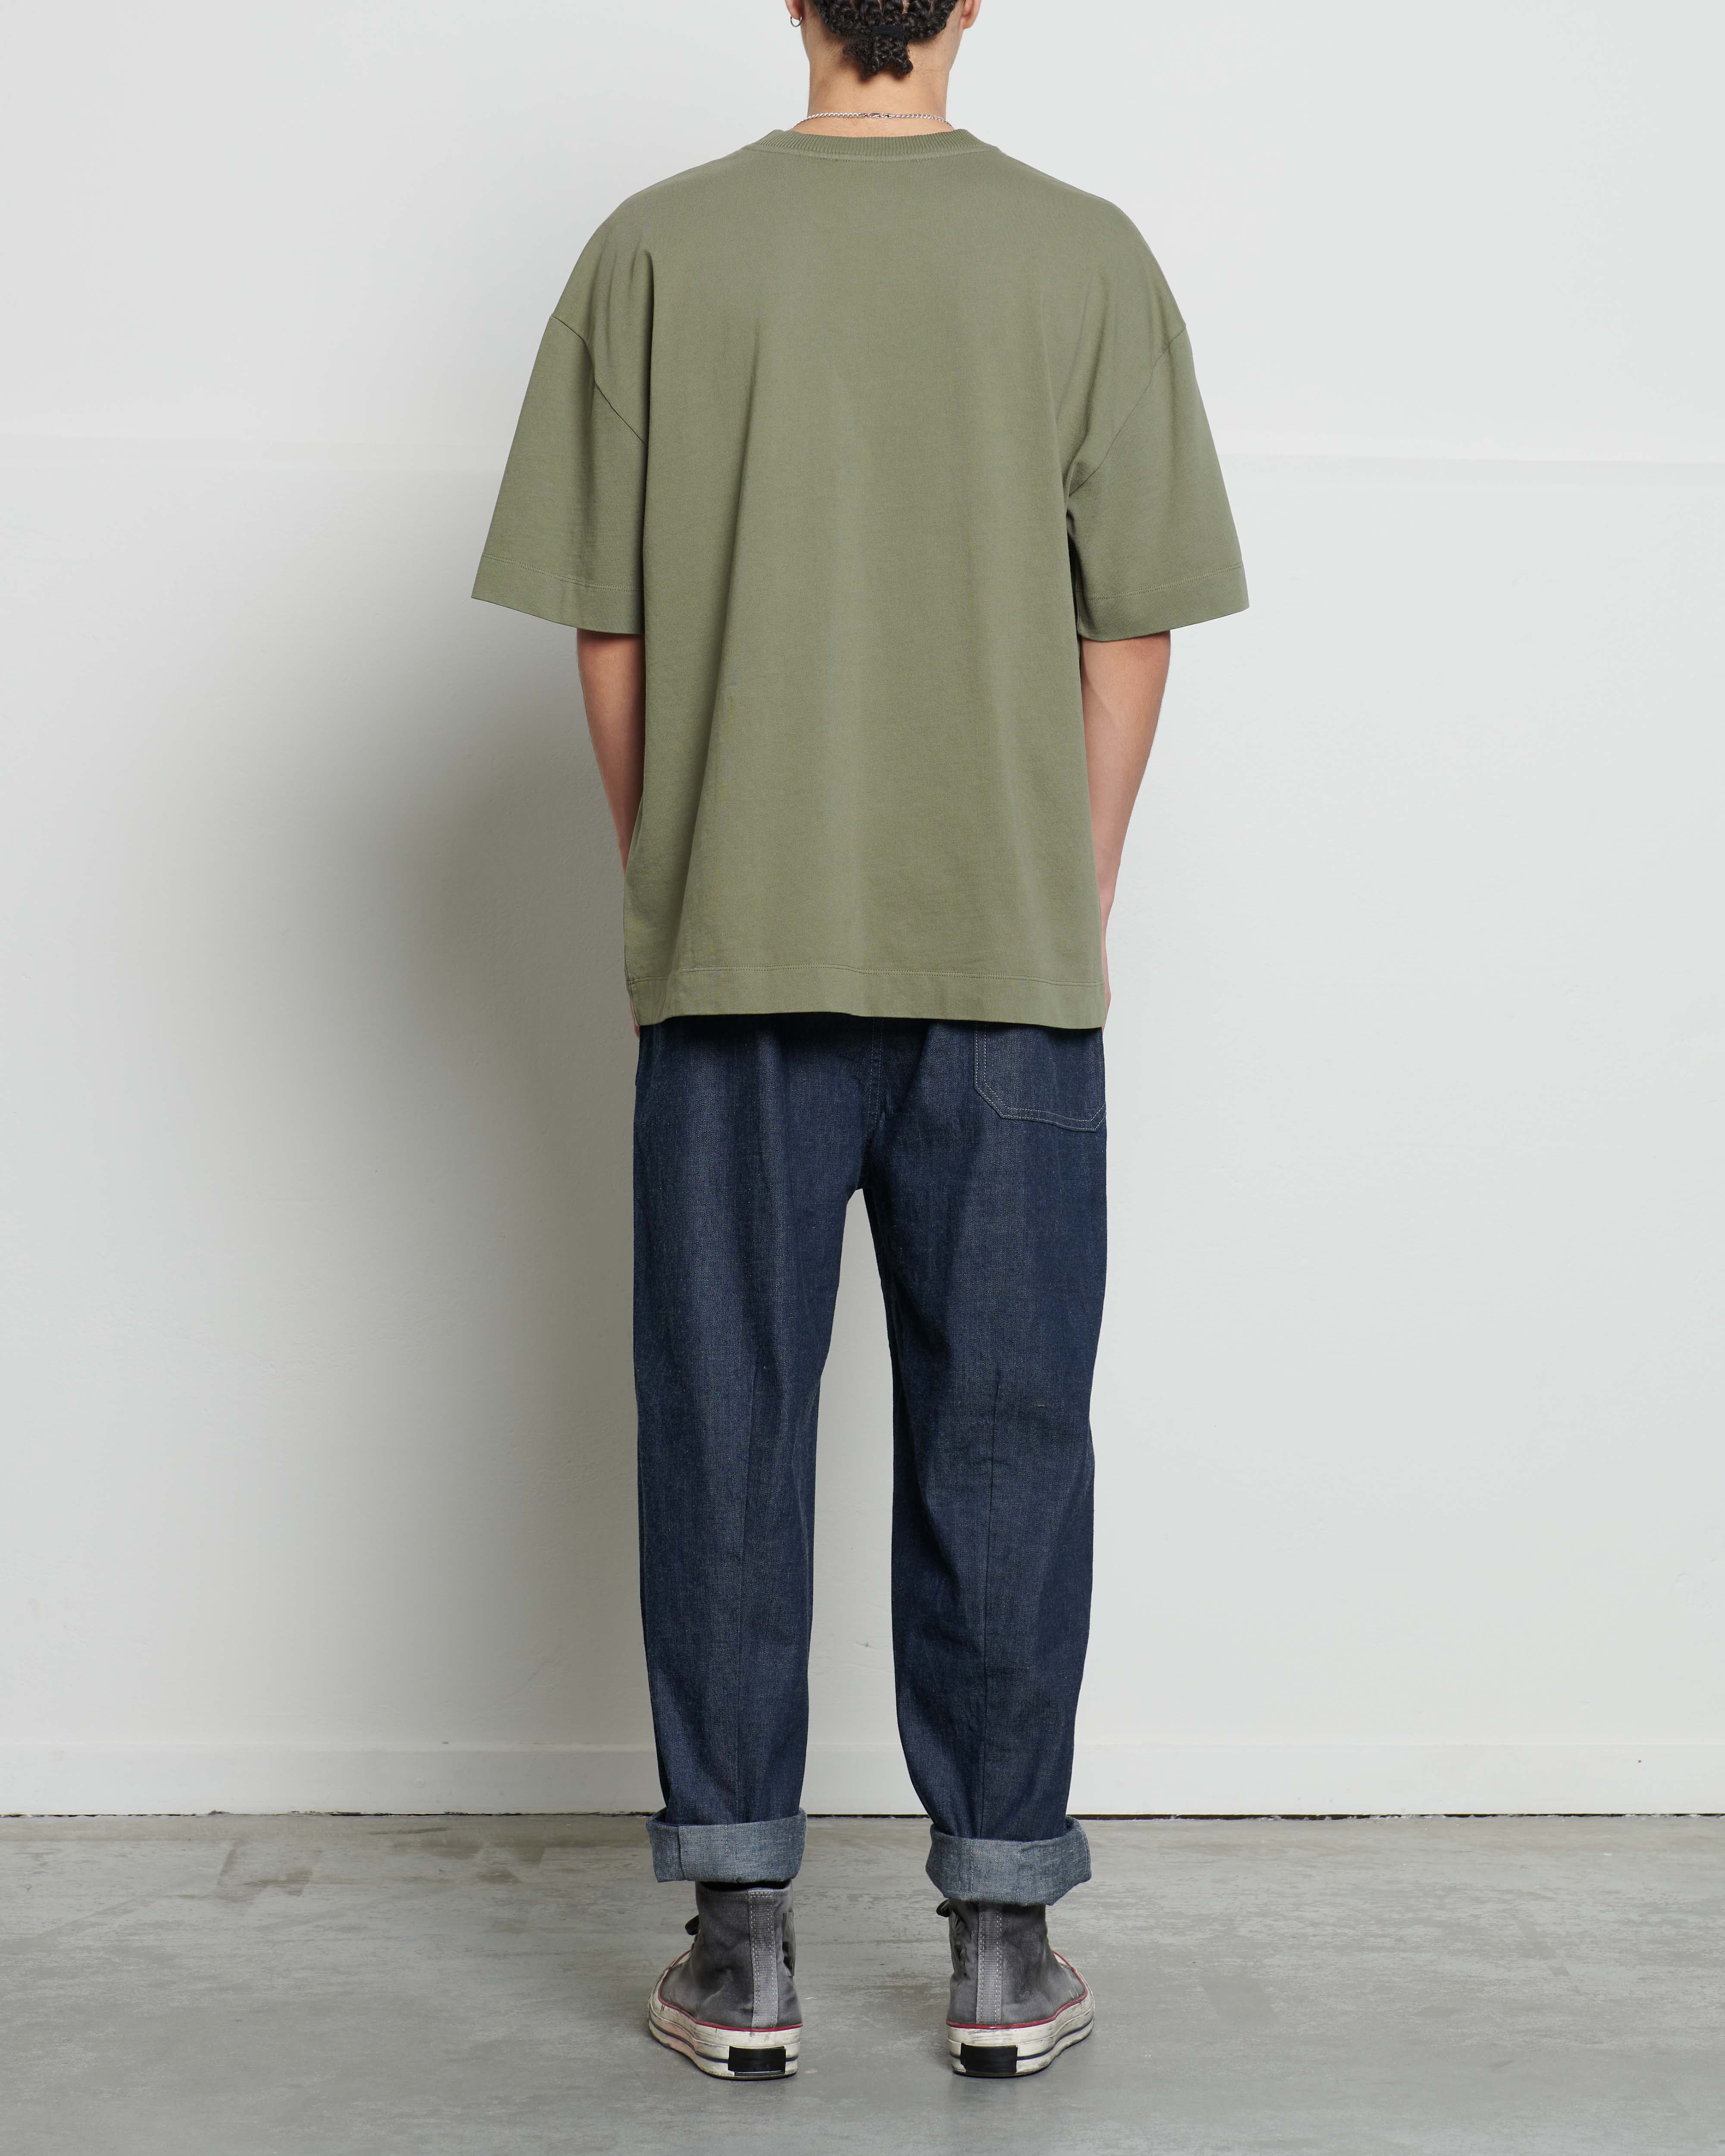 APPLIED ART FORMS Oversize T-Shirt in Dust Green L